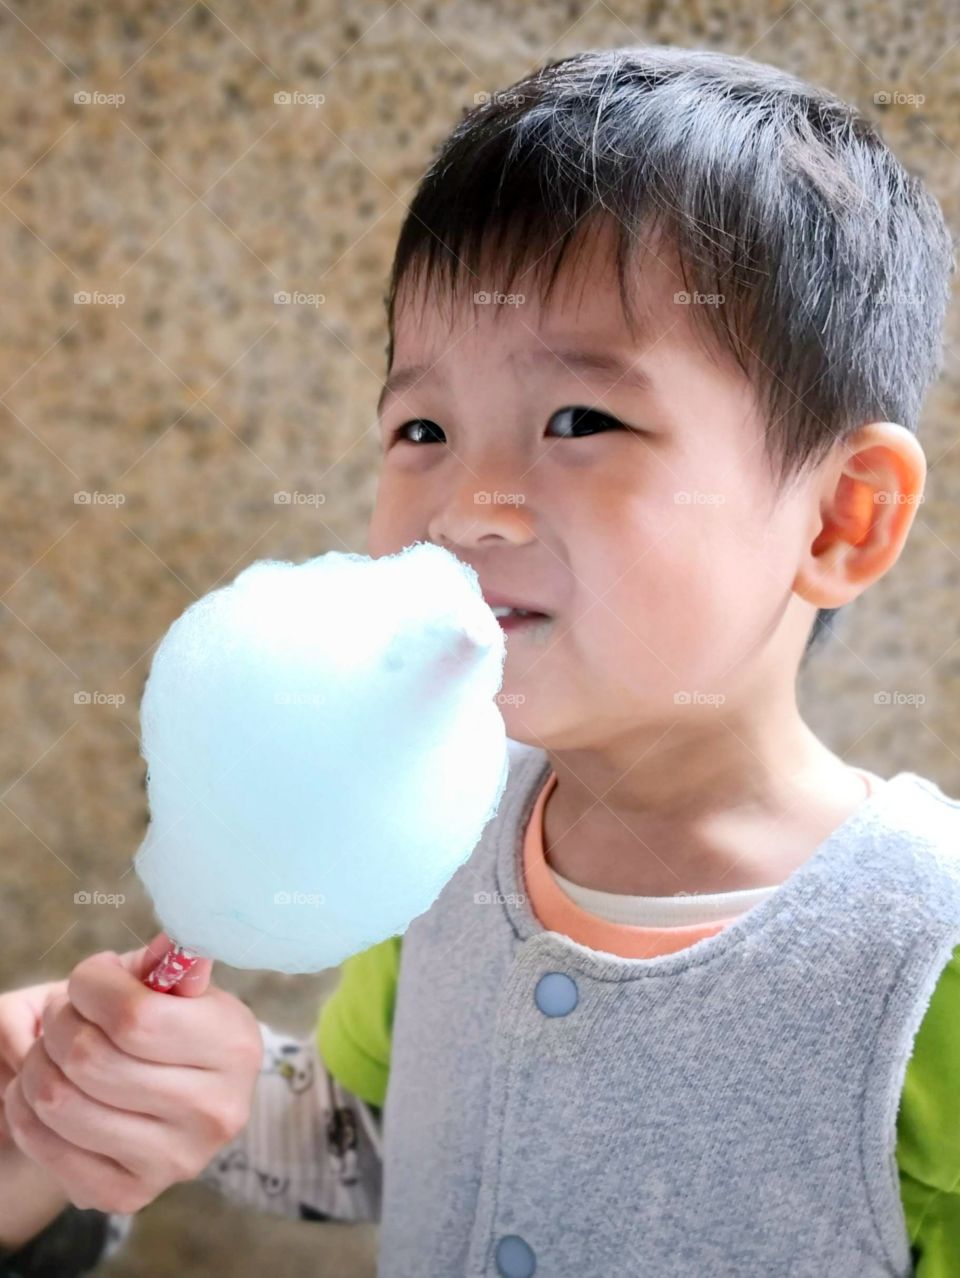 Cotton Candy, so sweet, yummy!!